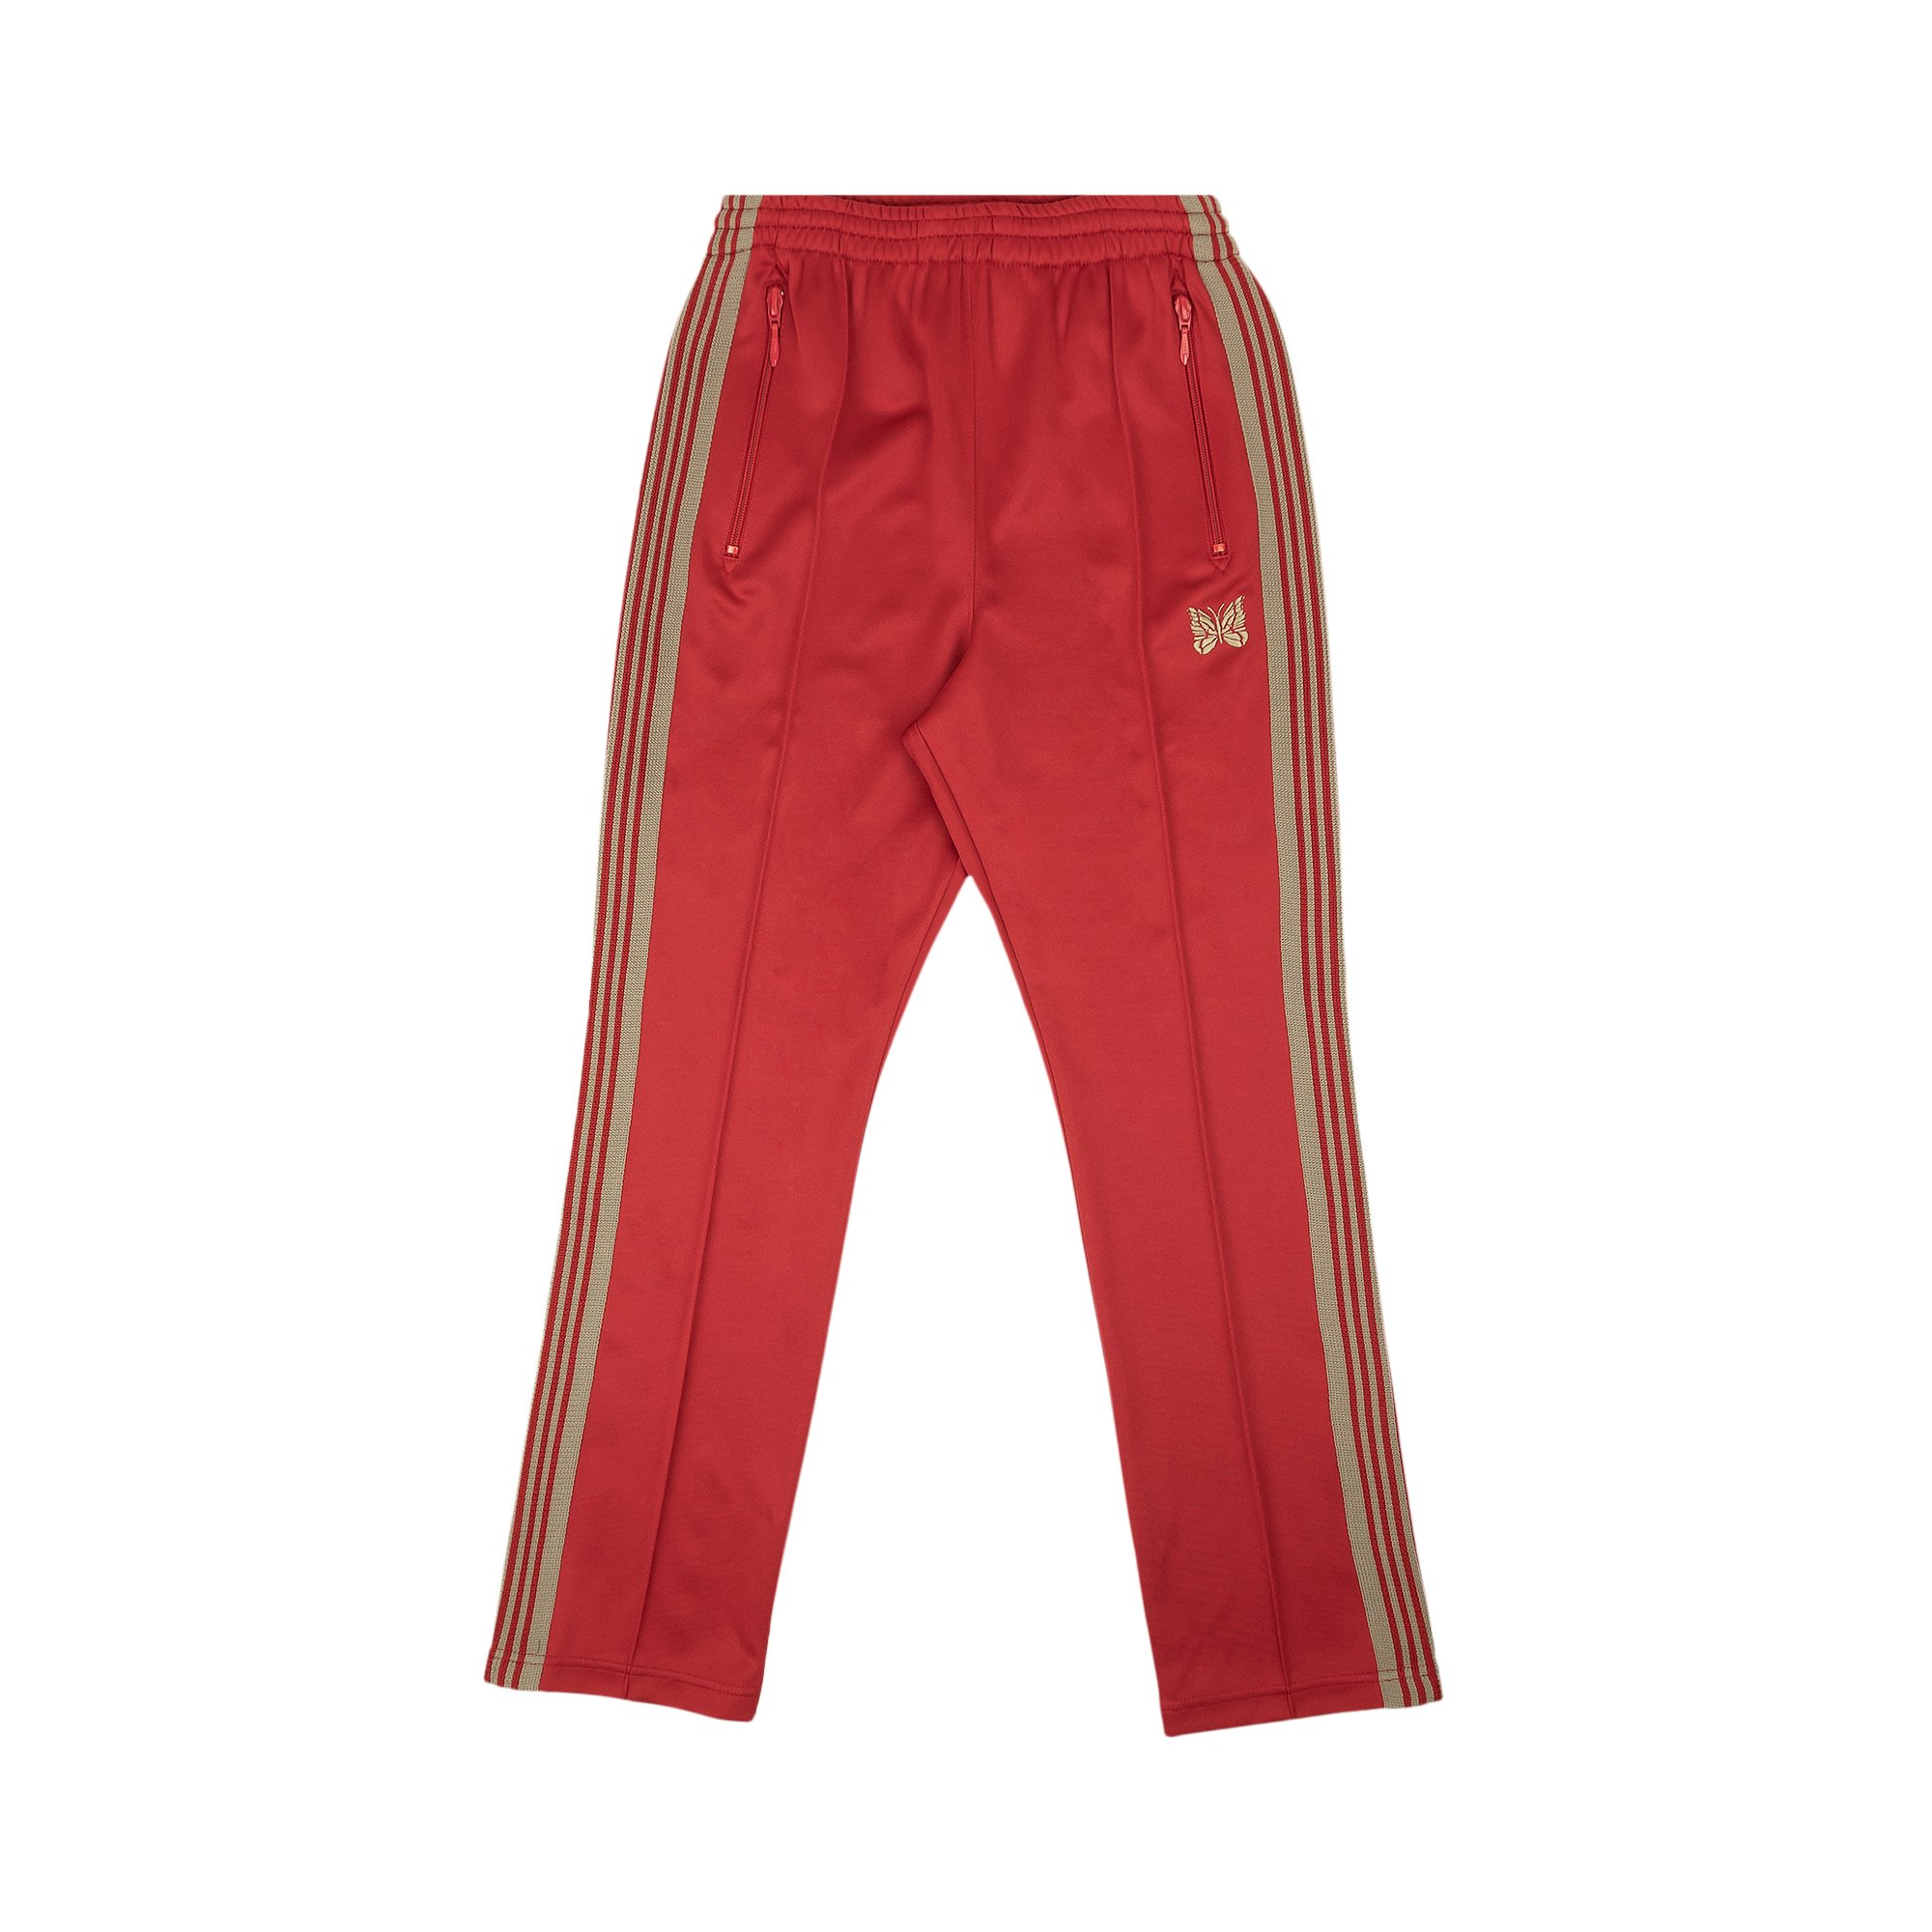 Buy Needles Narrow Smooth Track Pants 'Red' - KP221C RED | GOAT